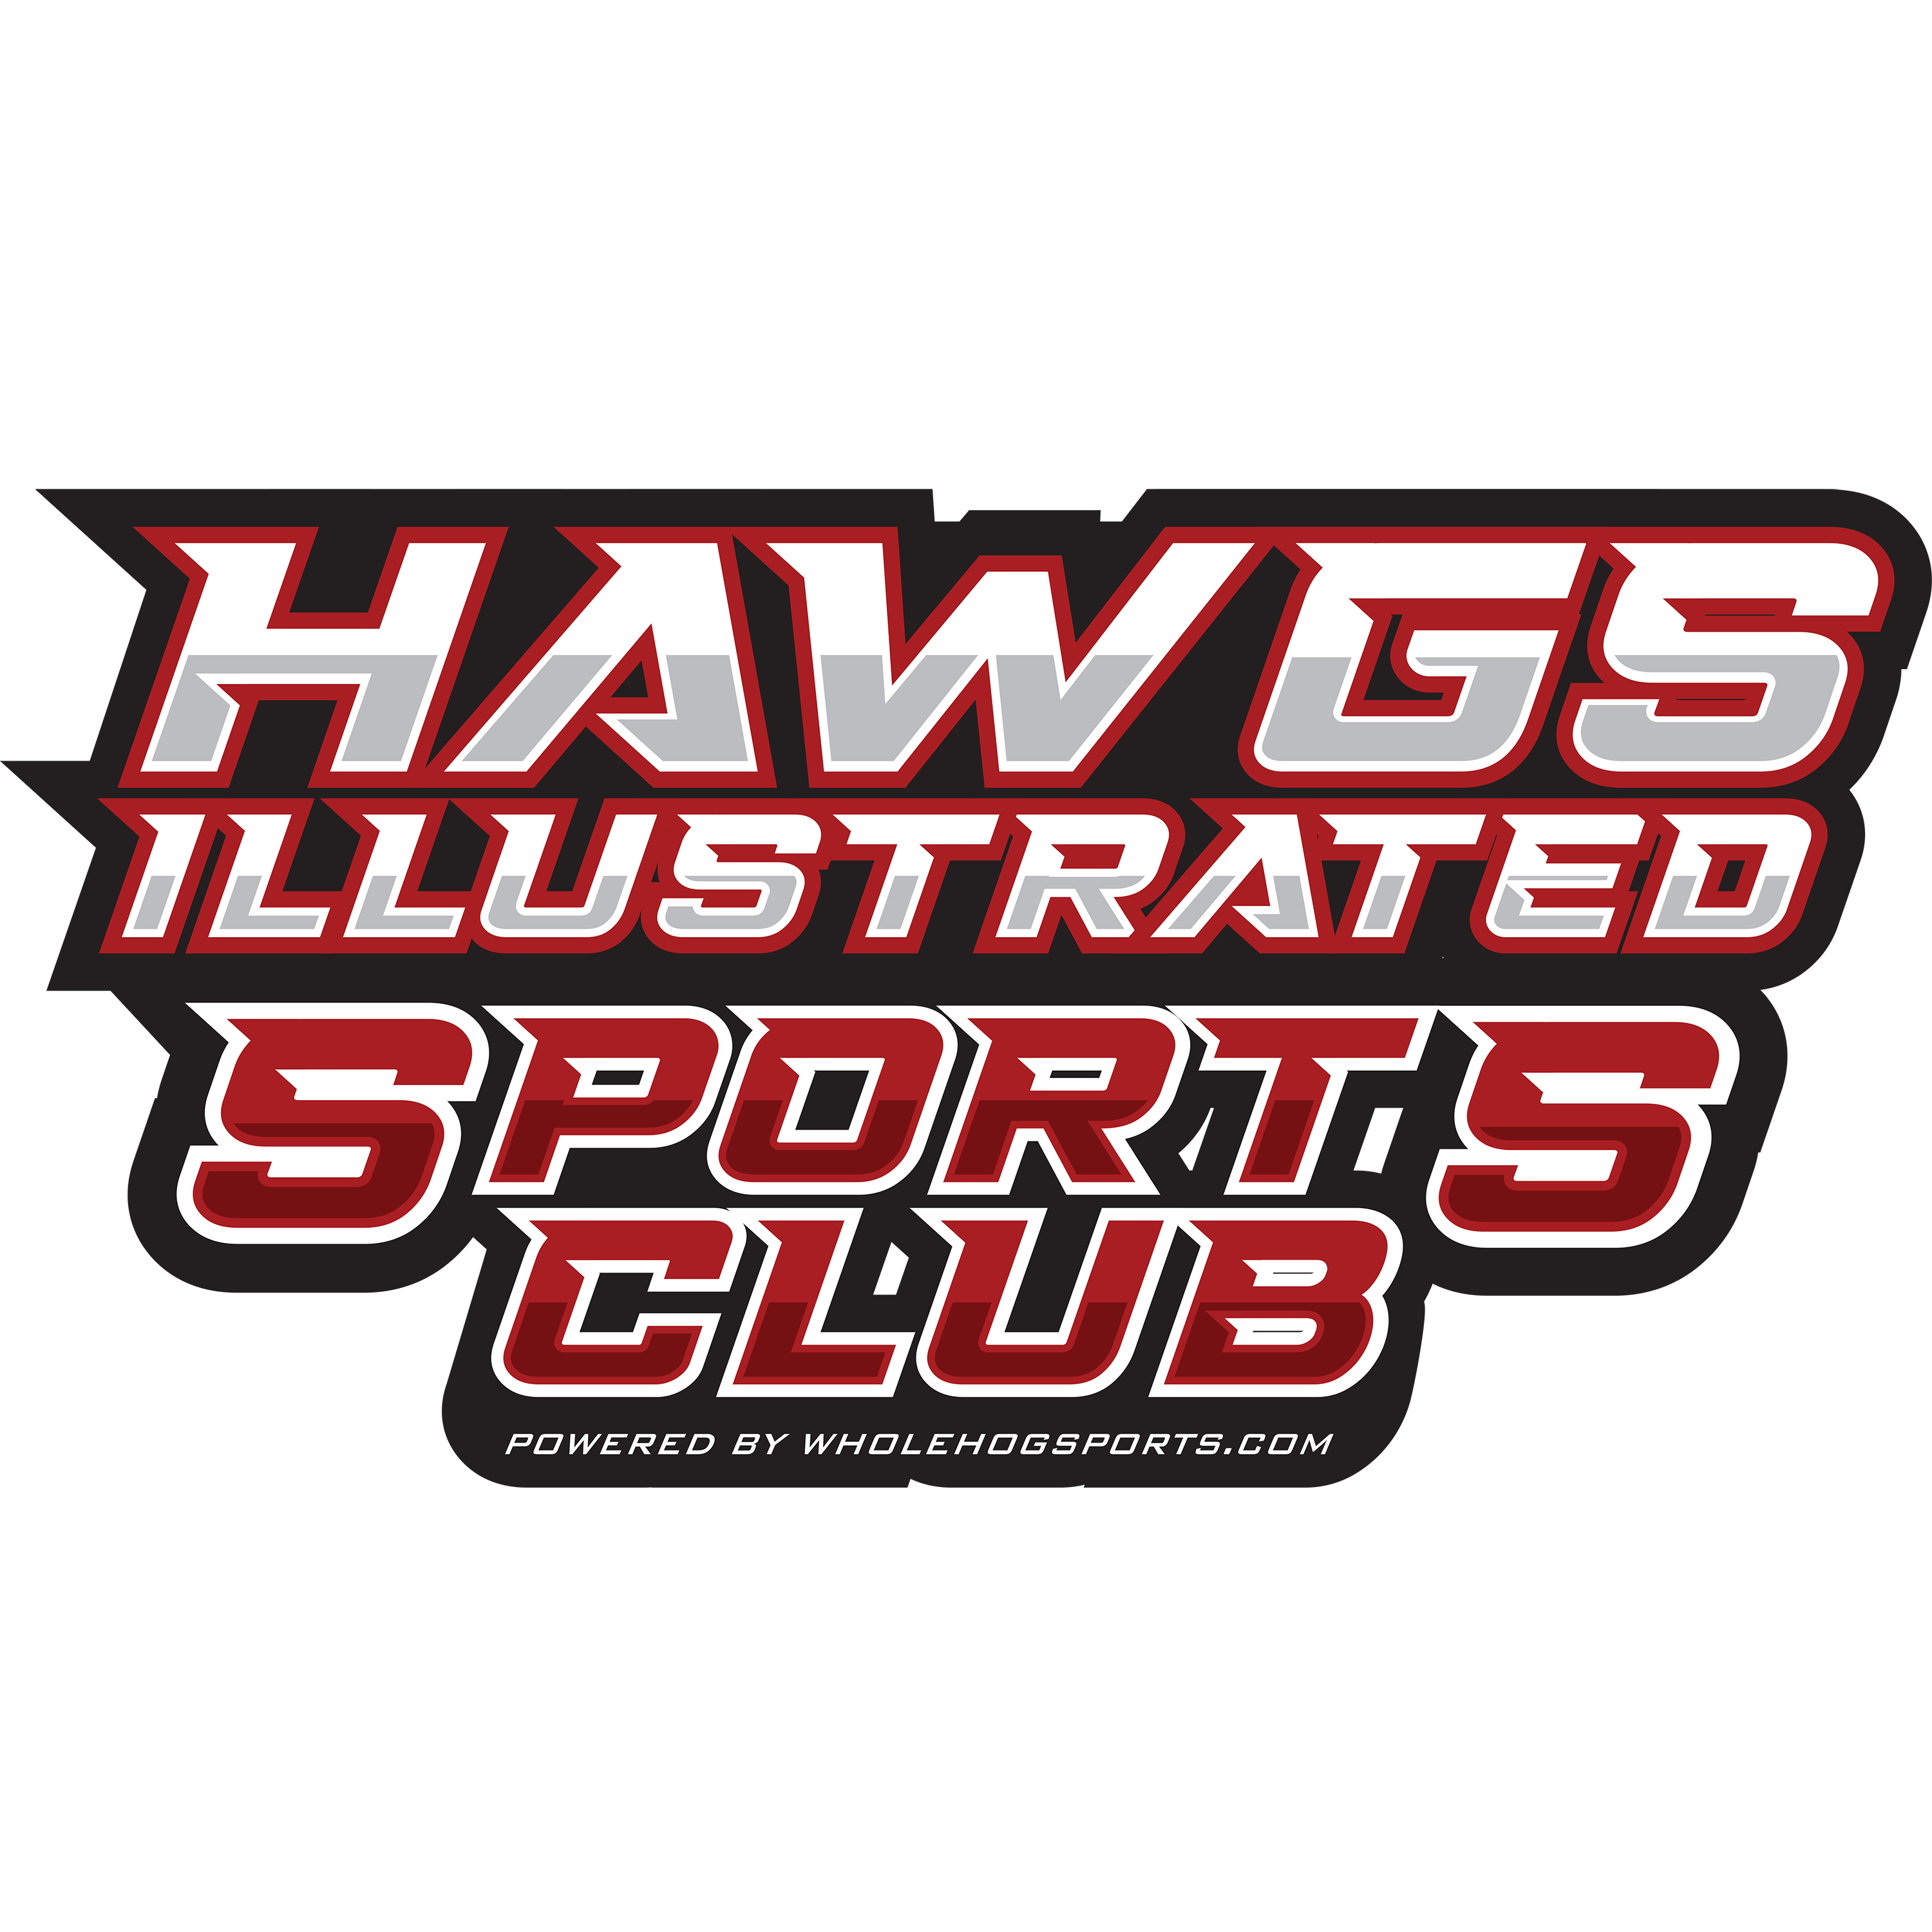 Hawgs Illustrated Sports Club Podcast: Guest speaker Mike Neighbors